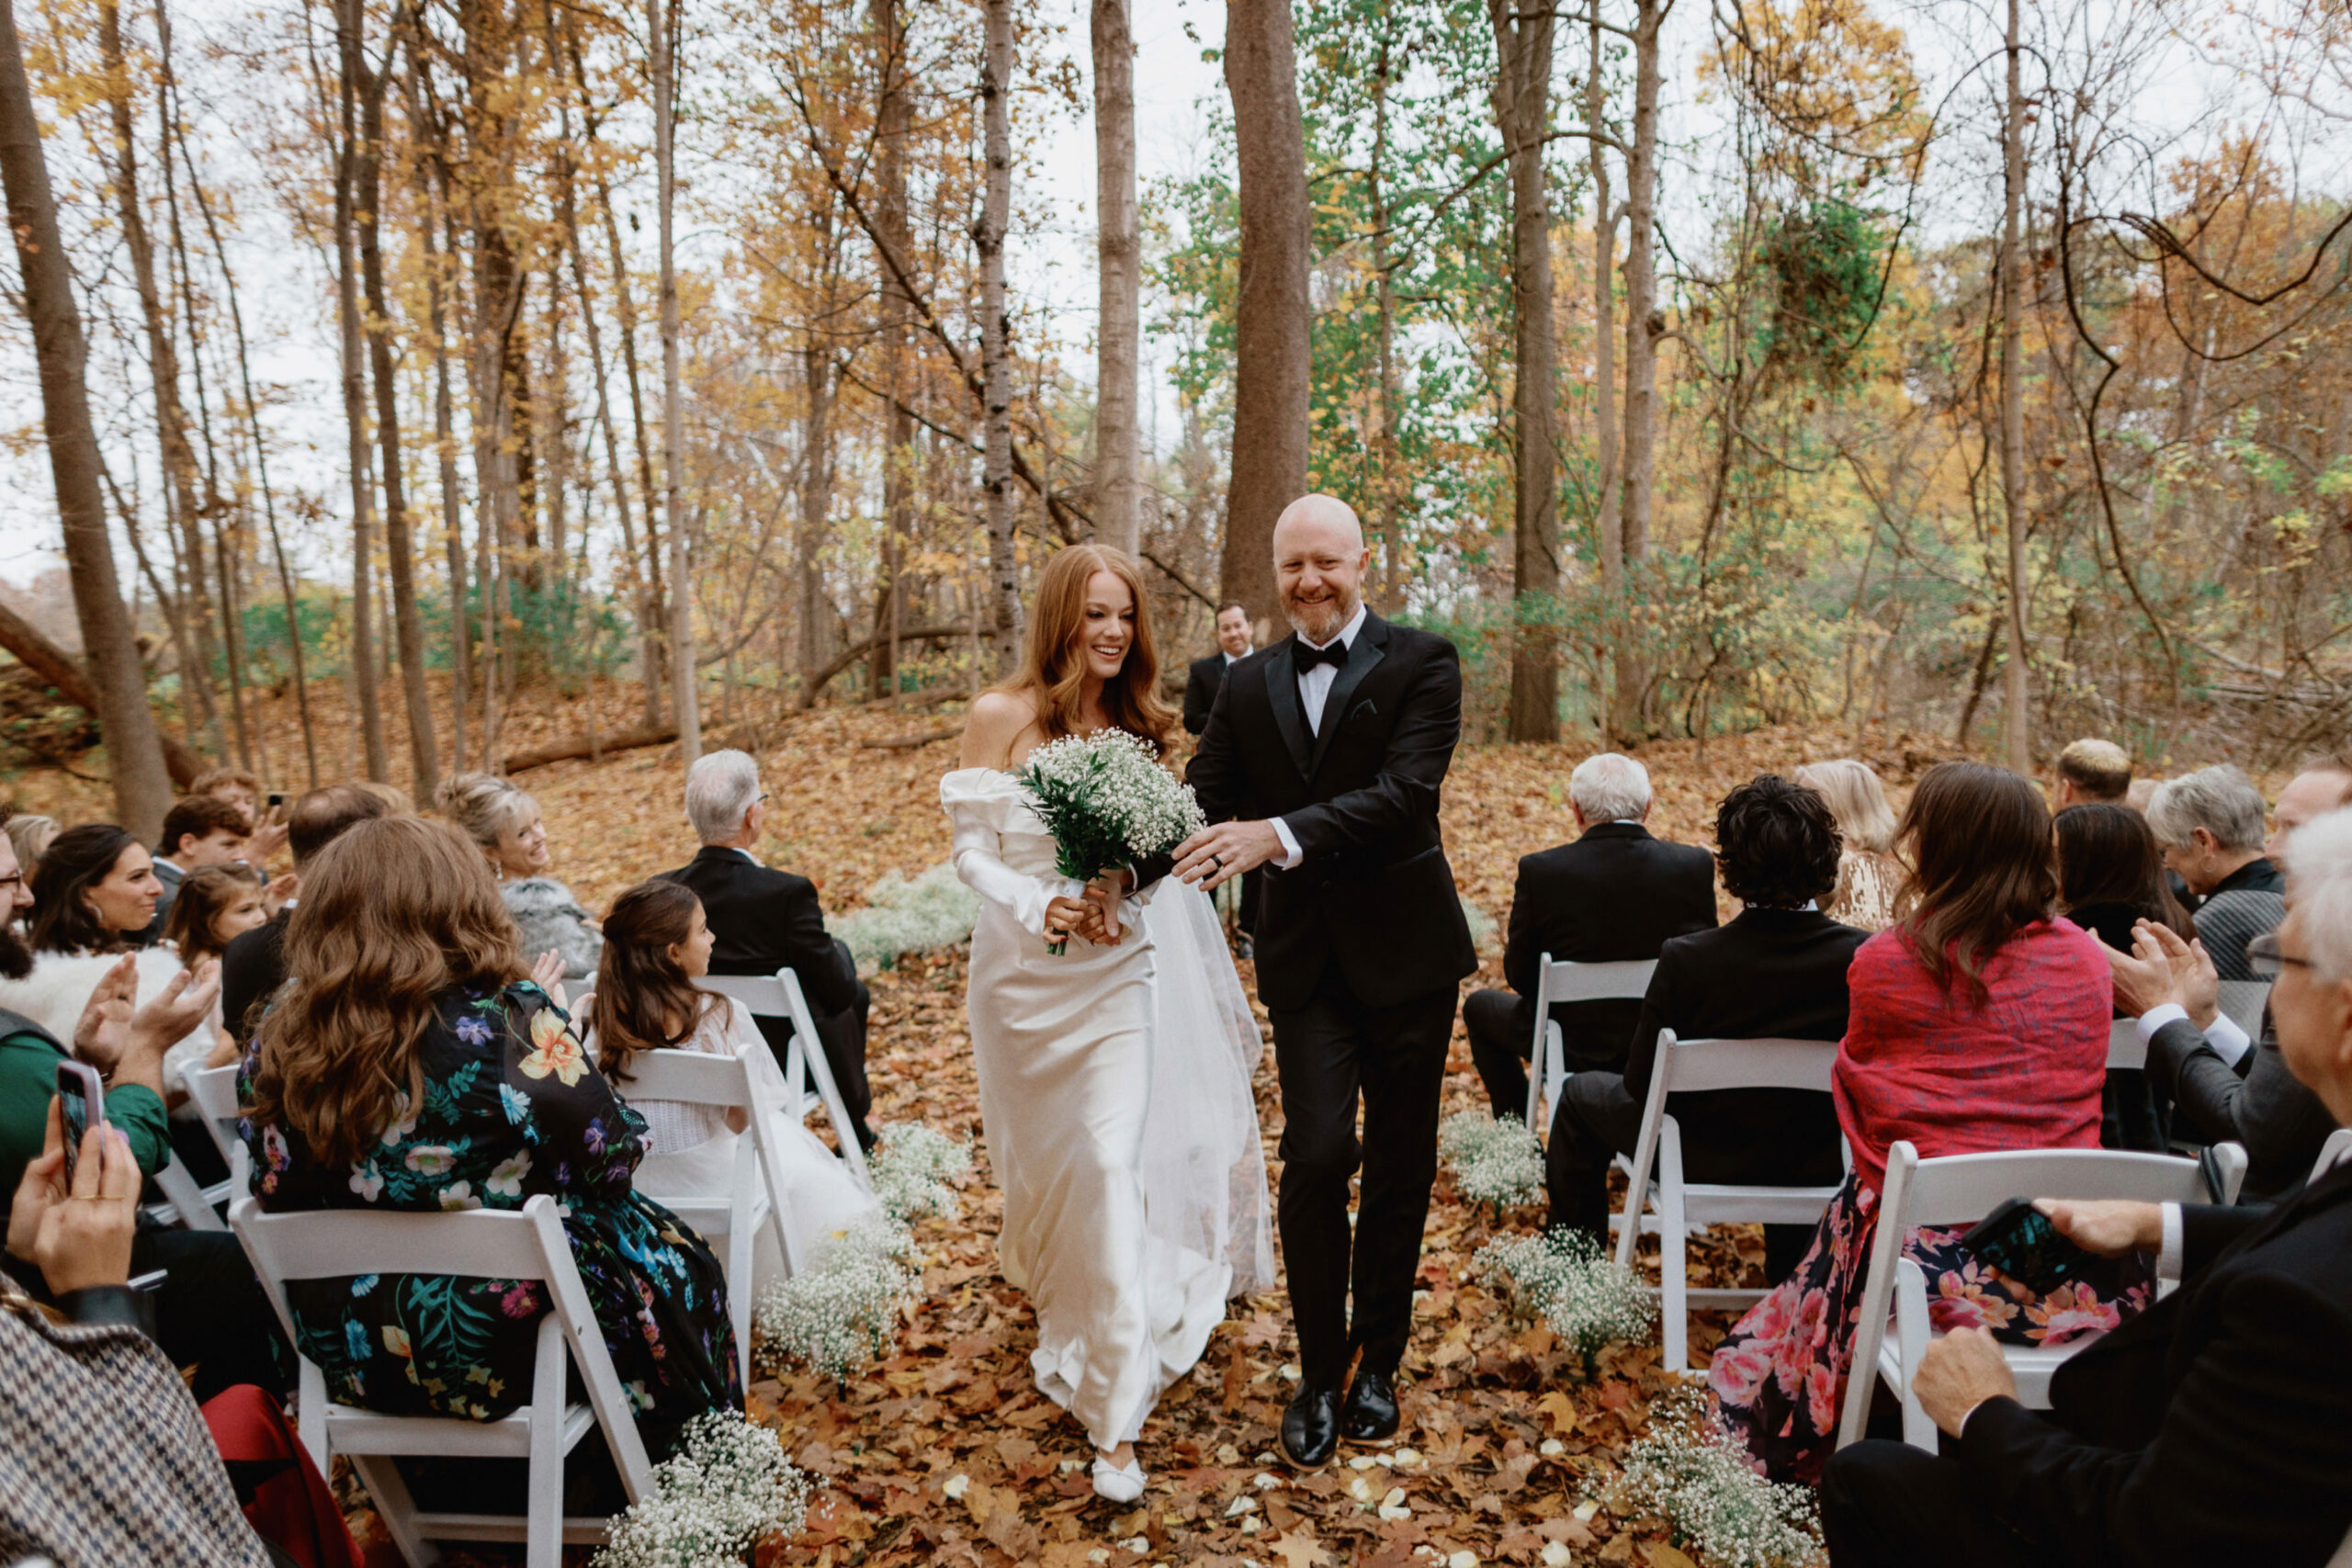 The couples are happily walking back down the aisle. Candid wedding photography image by Jenny Fu Studio